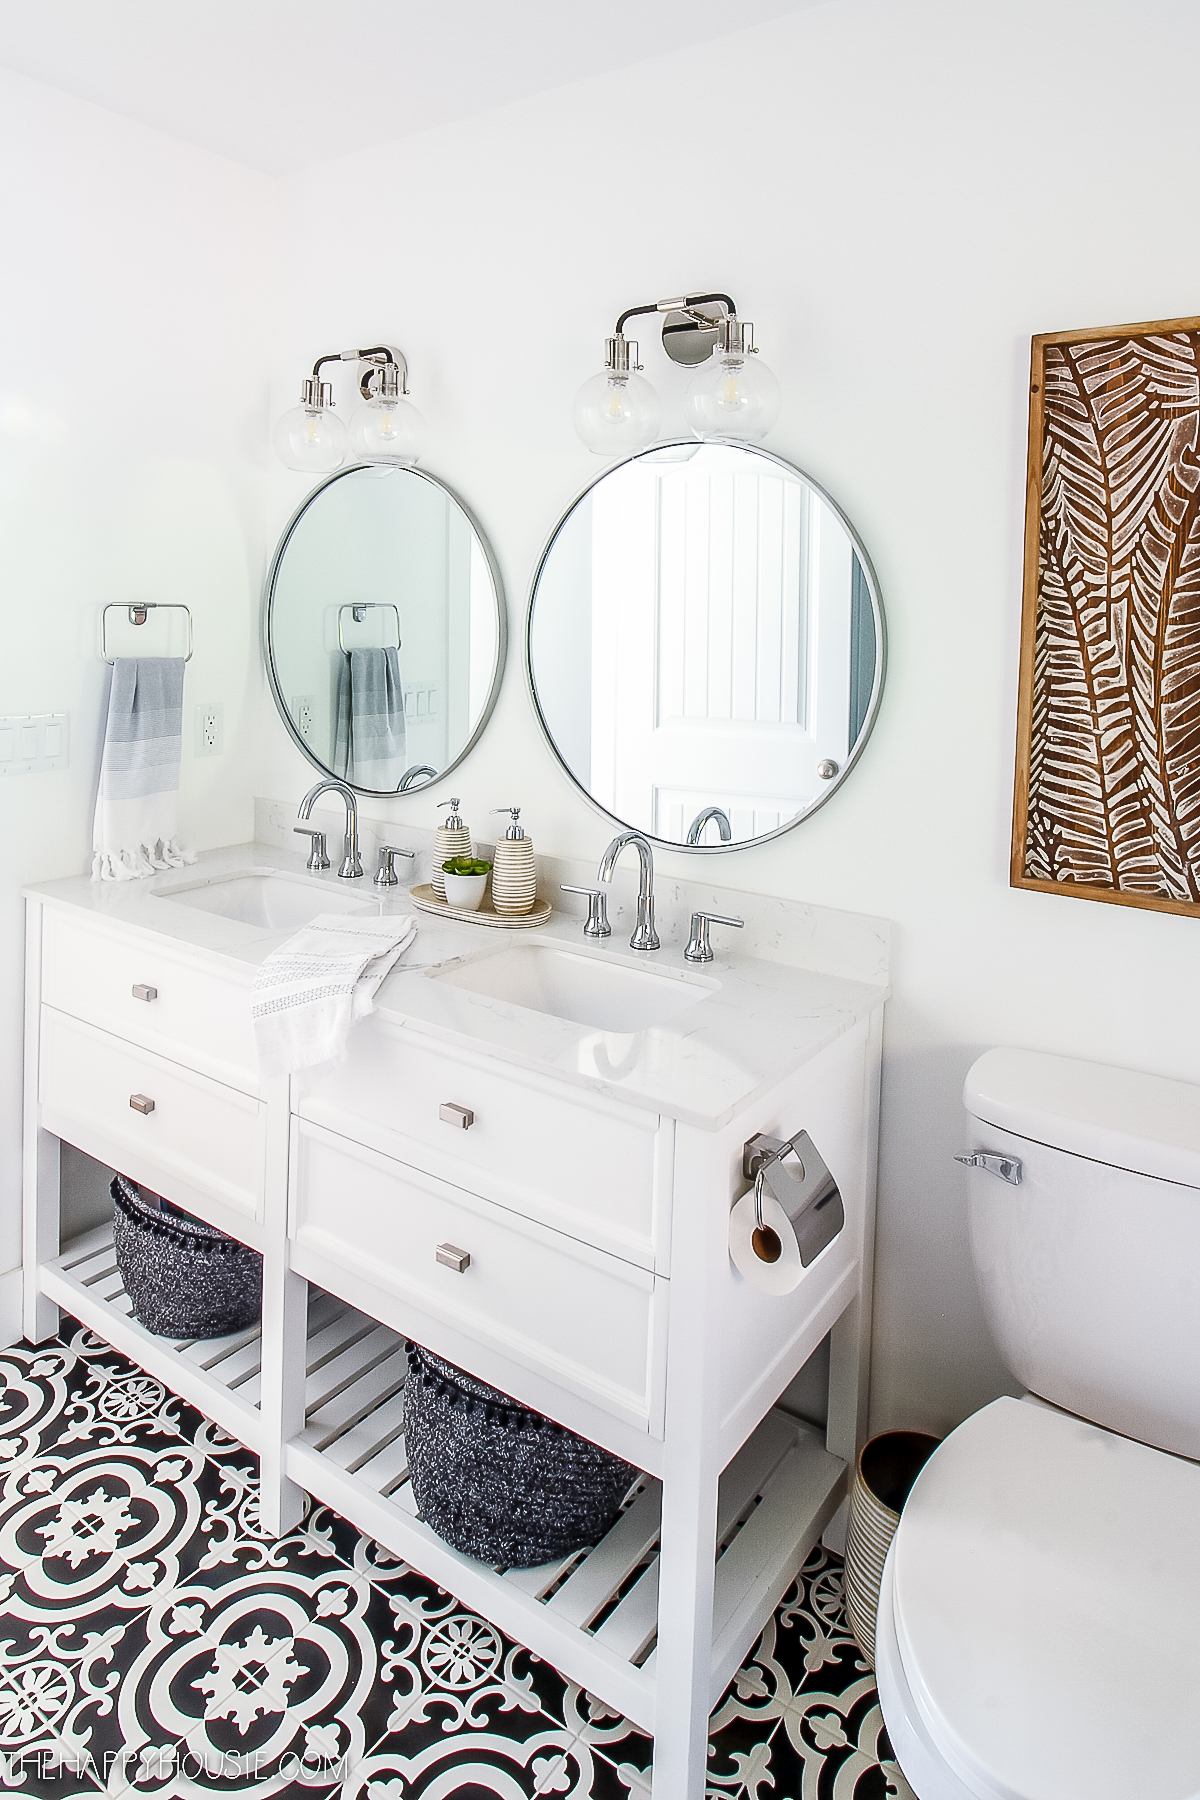 A white vanity with updated faucets.